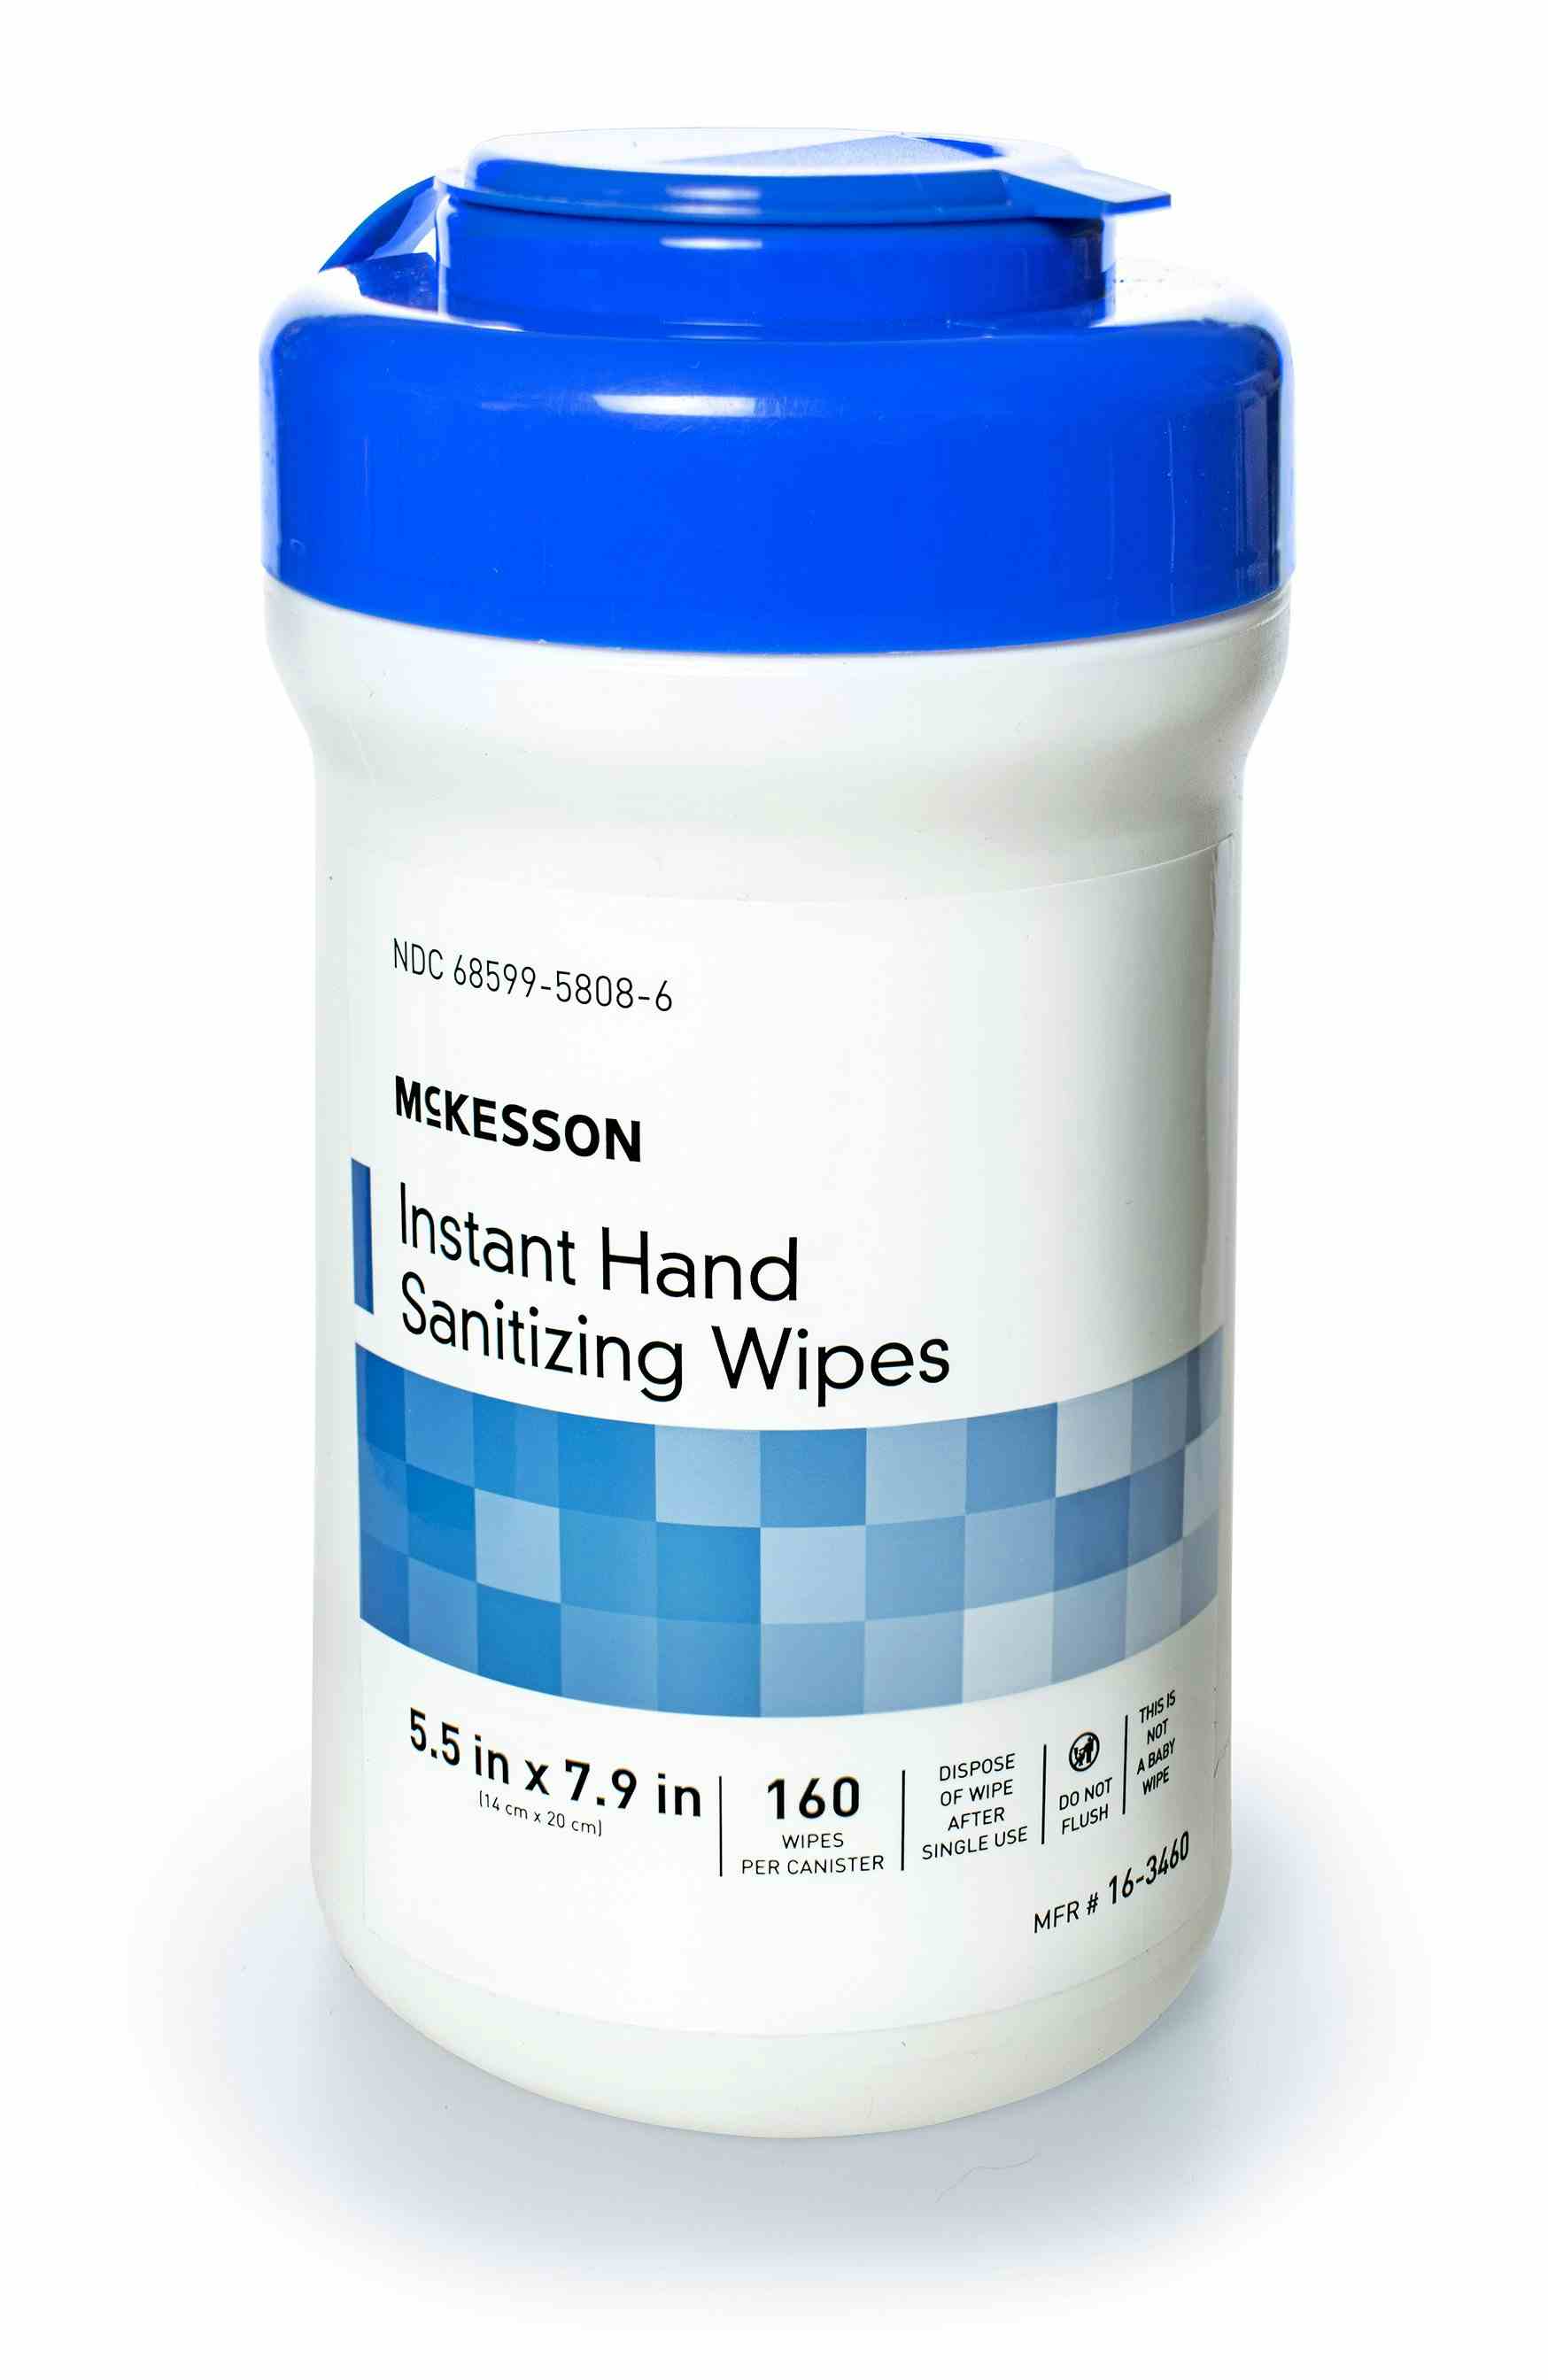 McKesson Instant Hand Sanitizing Wipes, 16-3460, 1 Canister